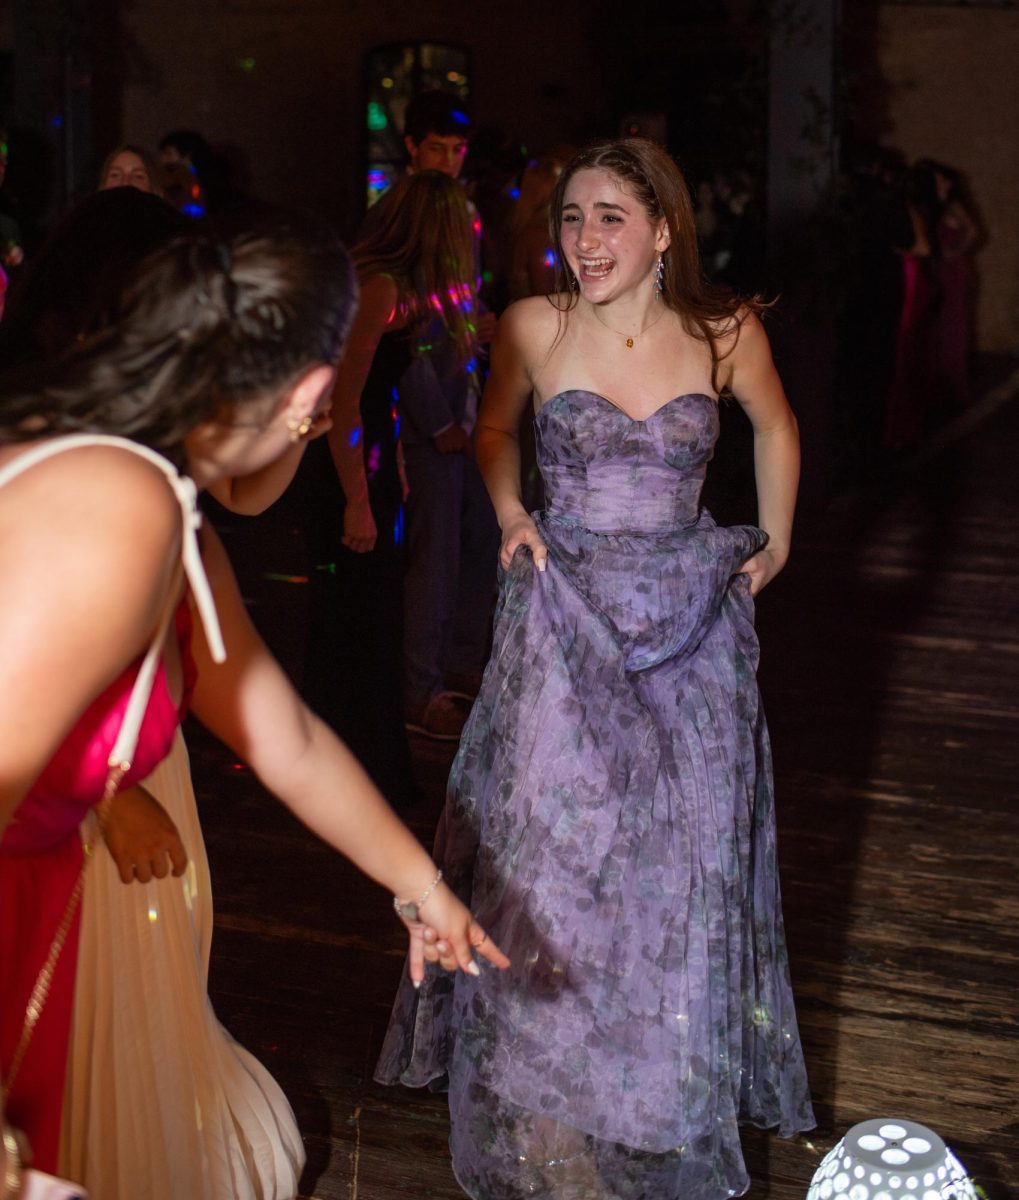 BOPPING TO THE BEAT: Senior El McGinnis dances with senior Olivia Hexsel at Brazos Hall during prom night. For McGinnis, the best part of the experience was seeing the senior class come together for a shared evening of fun.

“It was awesome,” McGinnis said. “Everyone was dancing the whole time, which made it even better. Everyone [was] having a good time.”

McGinnis also enjoyed seeing Hexsel and senior Luca Leone be honored as prom royalty after weeks of voting by the senior class.

“[My favorite part was] watching my friends win prom king and queen,” McGinnis said.

Despite the fun-filled activities of the night, McGinnis felt prom was slightly bittersweet, serving as a marker of the end of her time in high school.

“I am so excited to graduate and experience a whole different environment surrounded by people who share the same passion as me,” McGinnis said. “But I will miss seeing my friends every day.”

Caption by Alice Scott. 